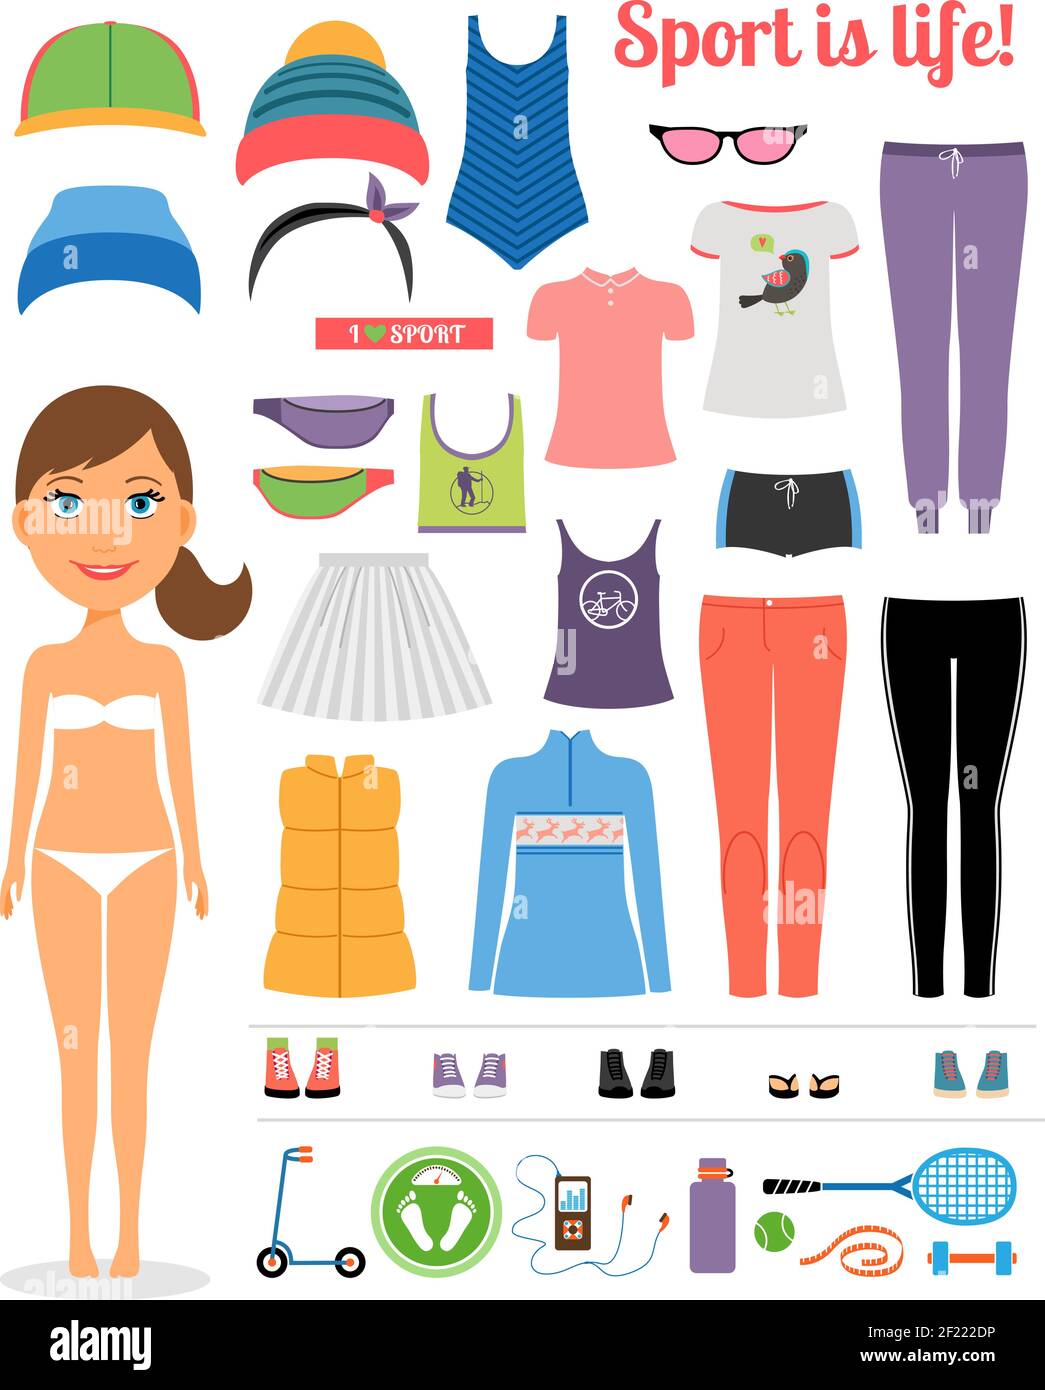 Cute Cartoon Sporty Girl with Assorted Fitness Clothing and Equipment  Emphasizing Sport is Life Concept. Isolated on White. Stock Vector